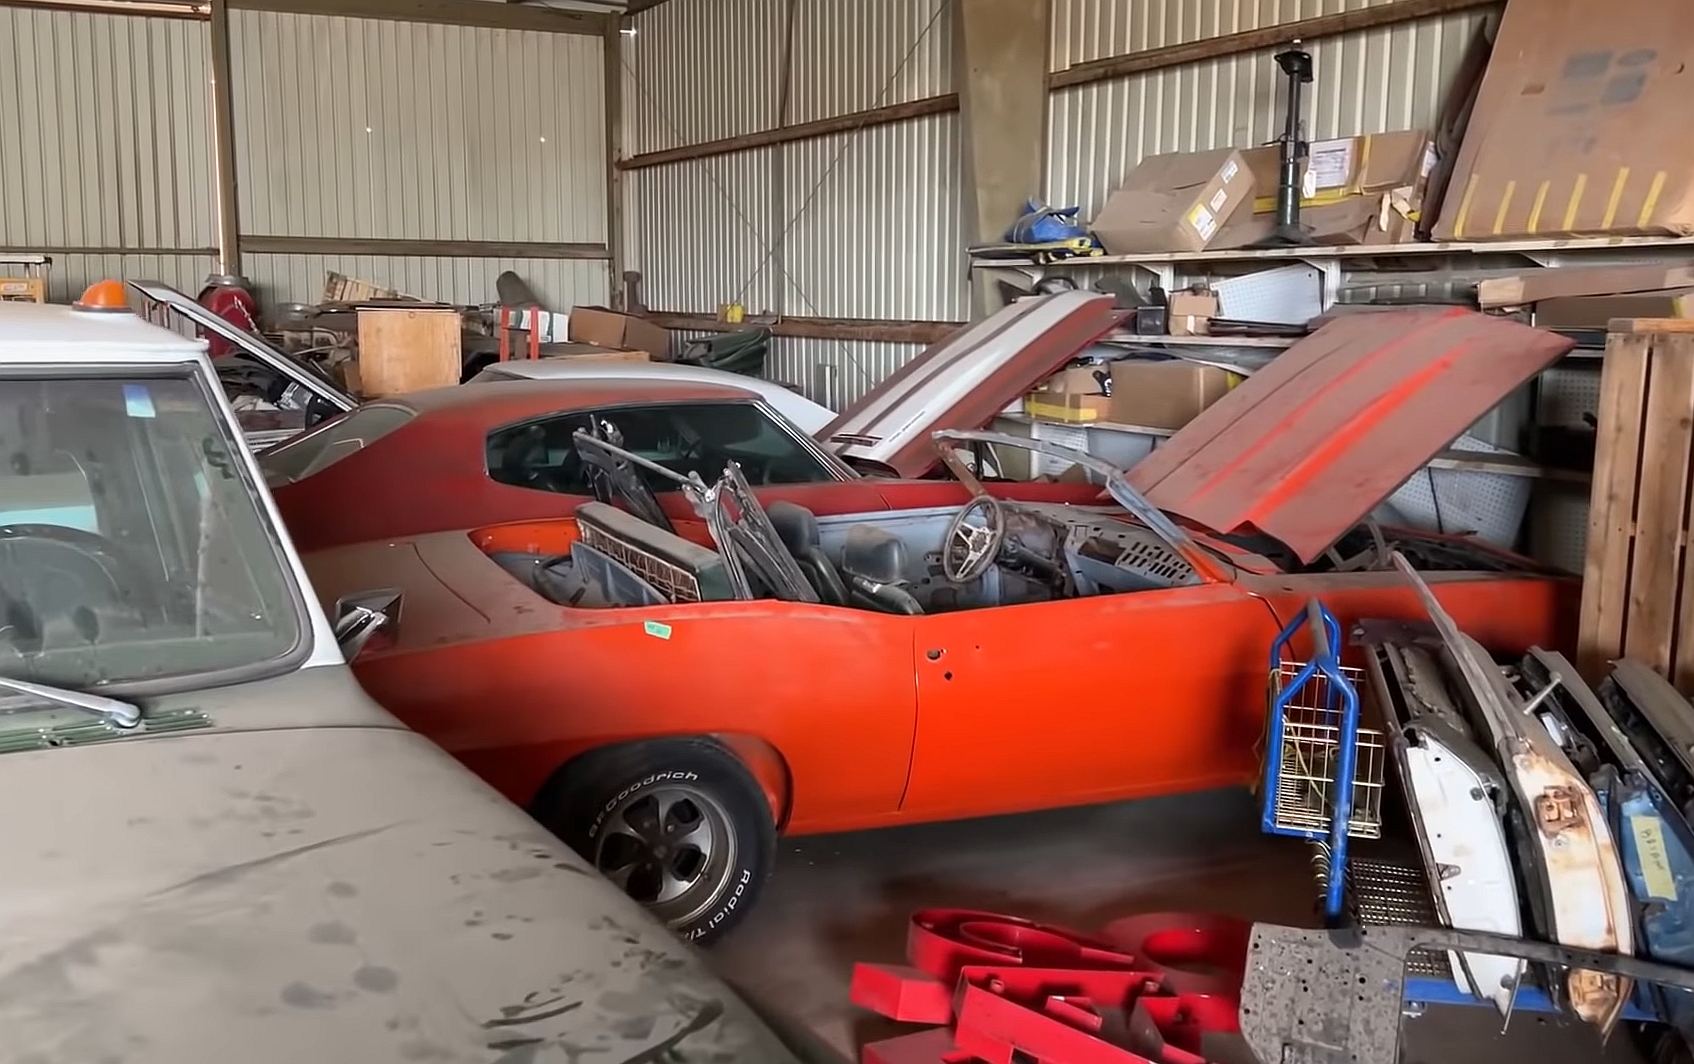 epic barn find includes 39 chevrolet camaro and chevelle classics a few rare ones too 179410 1